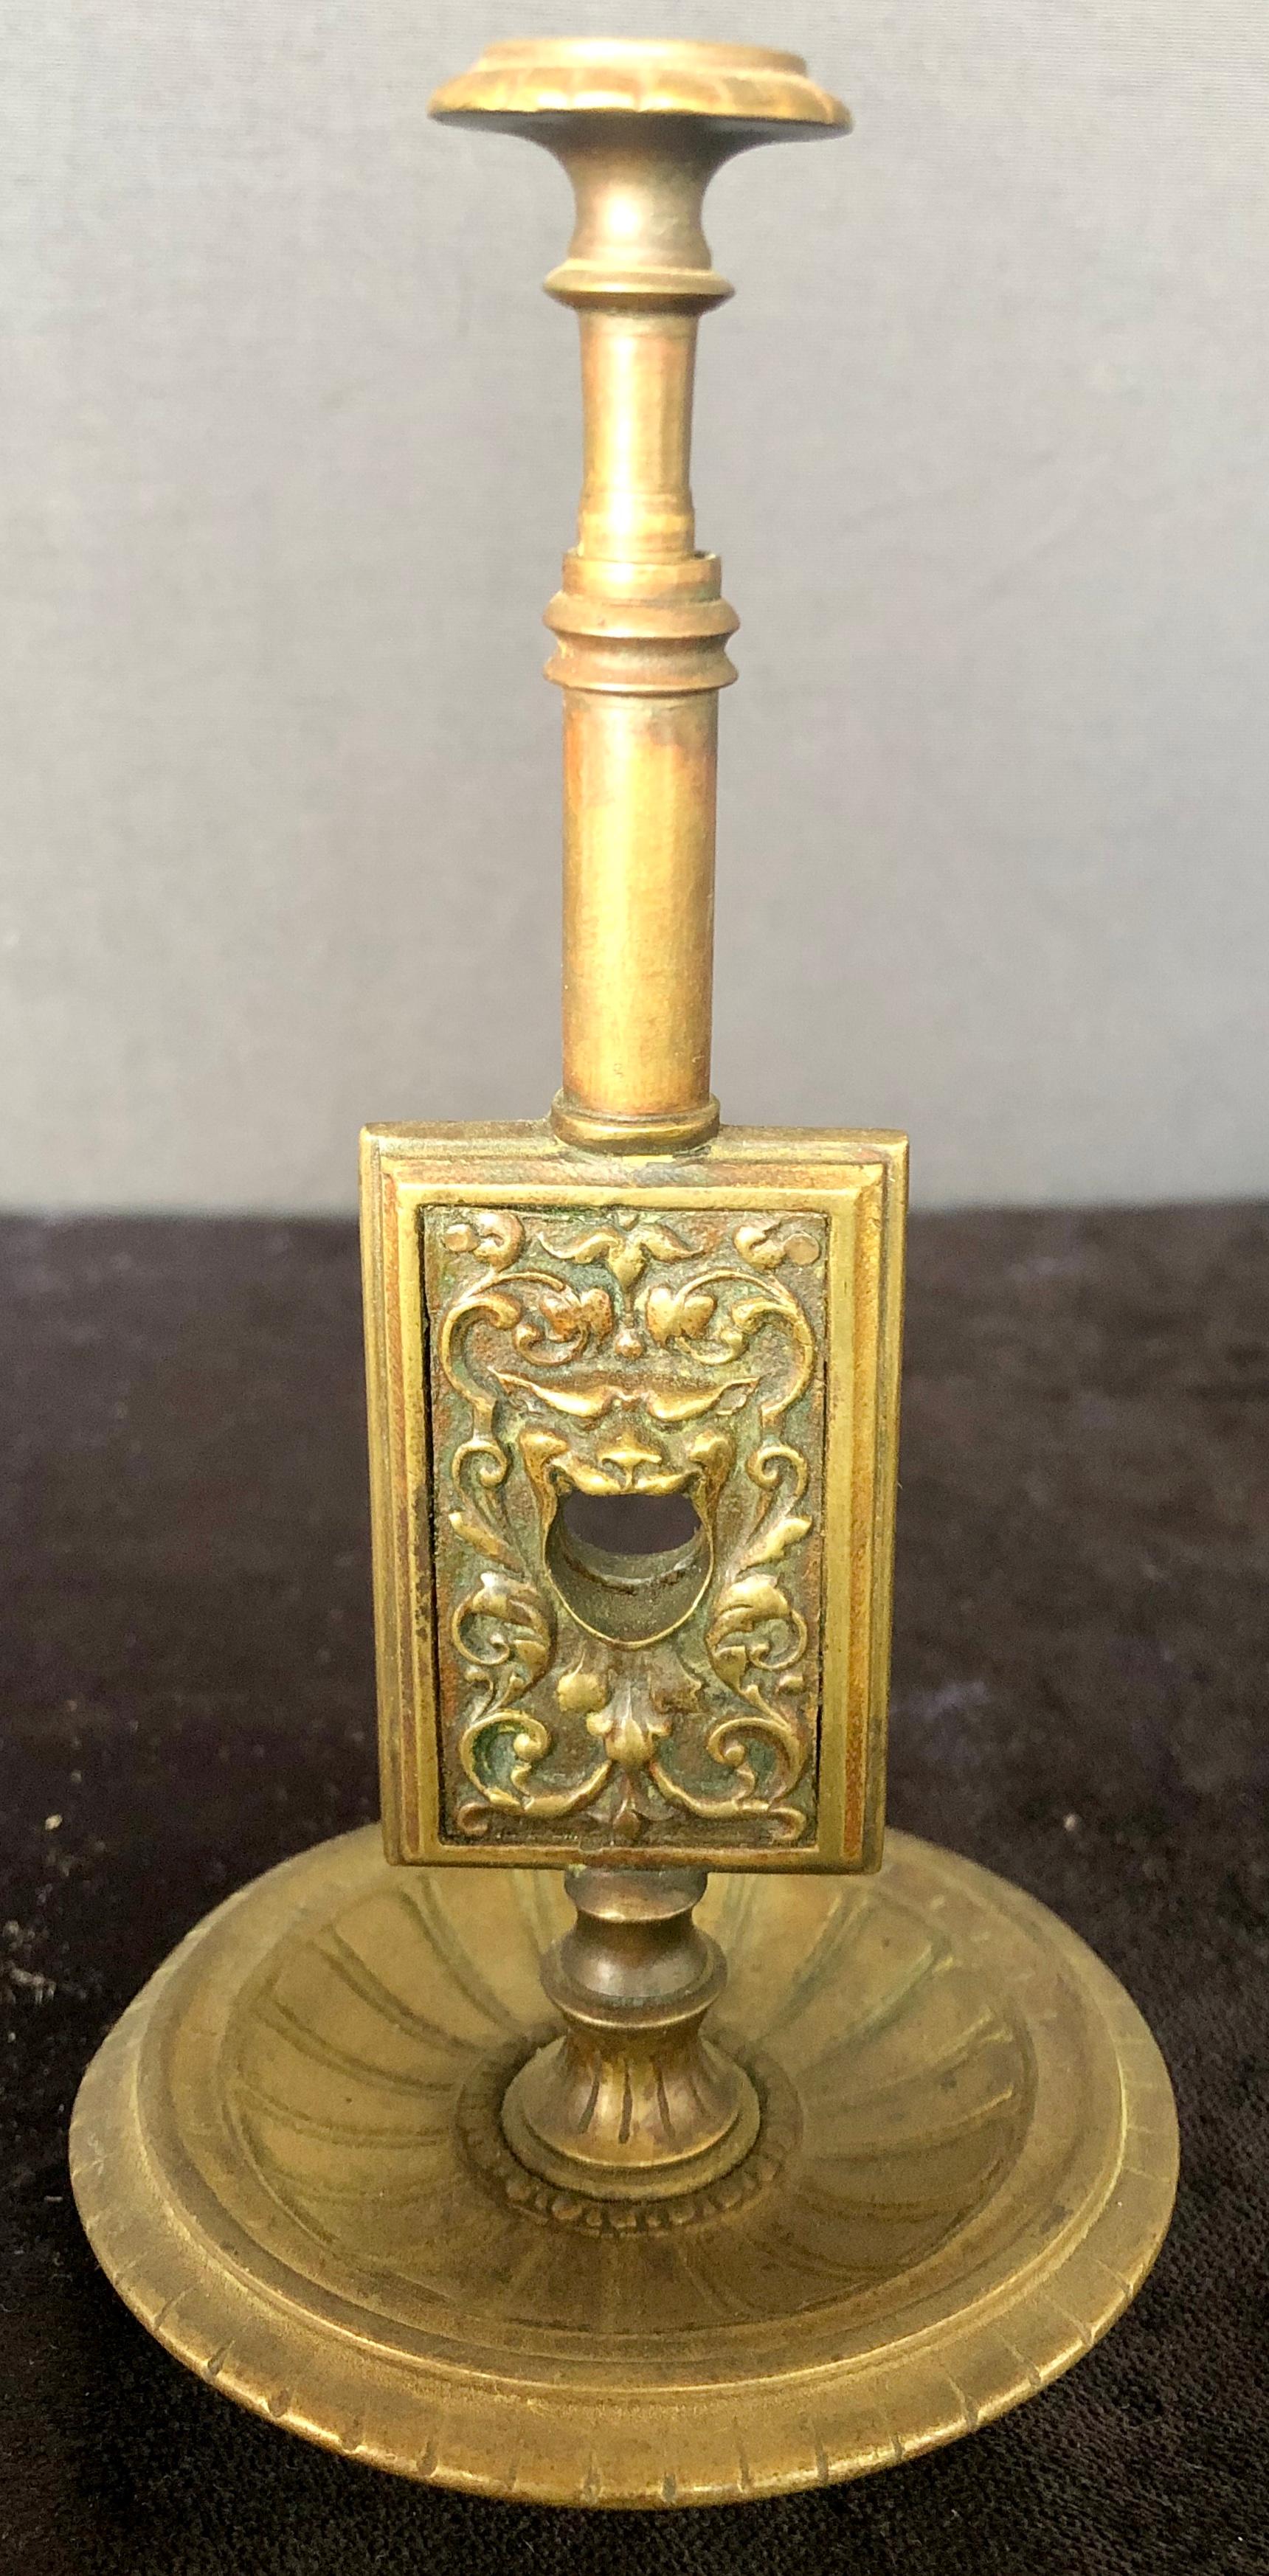 Vintage brass desktop cigar cutter featuring spring loaded pushdown cutting mechanism, excellent patina brass.
This is part of the personal collection purchased directly, from the estate of Jerry Terranova, Author of 